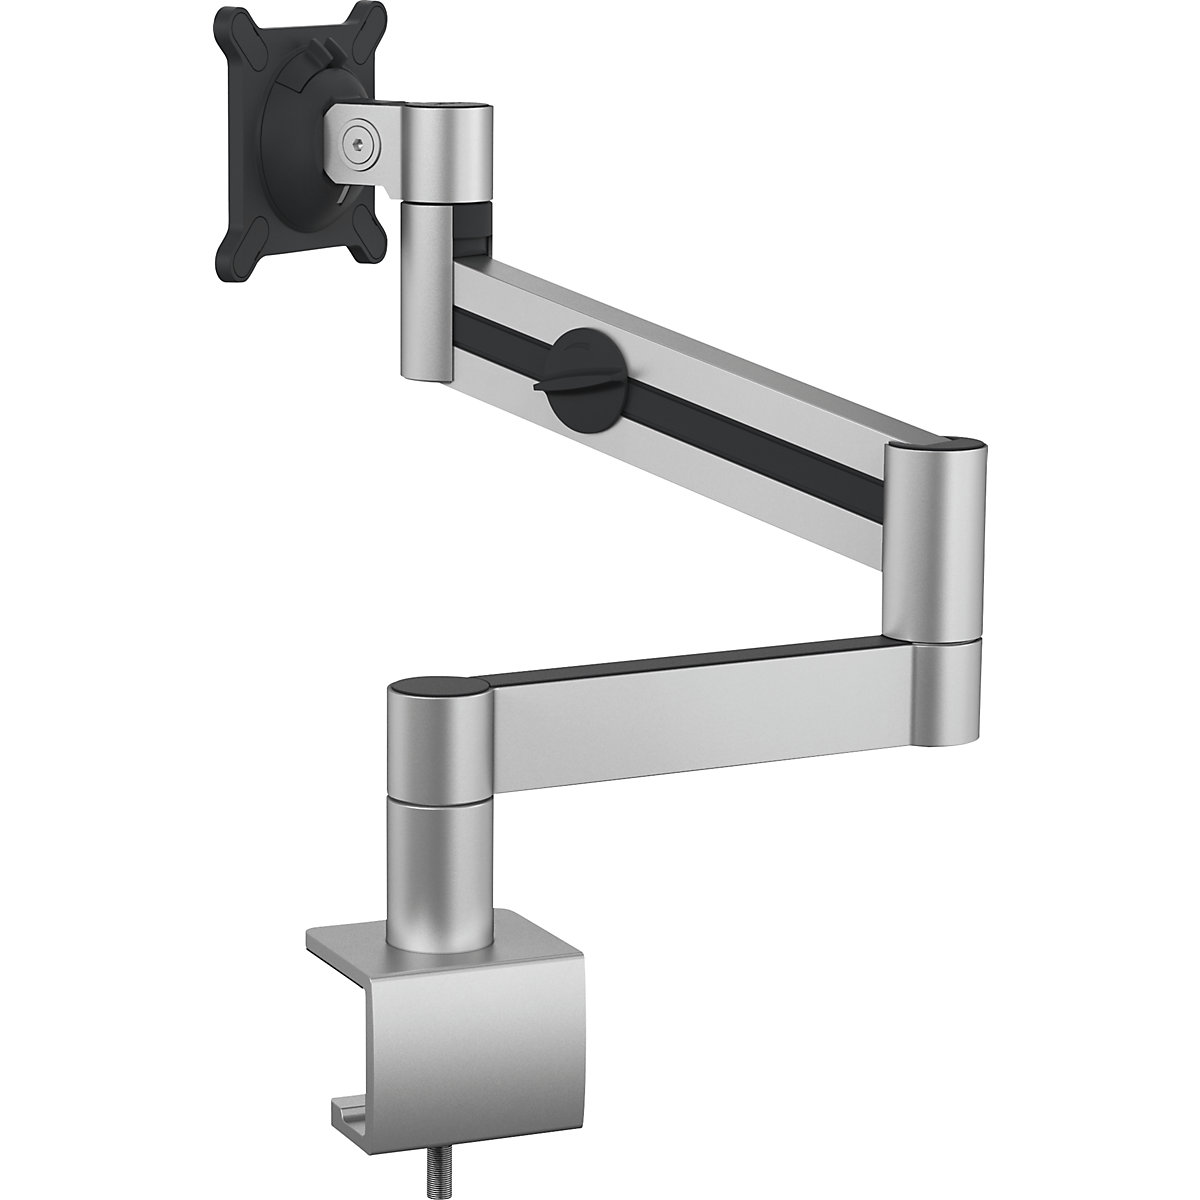 Monitor holder with arm for 1 monitor – DURABLE